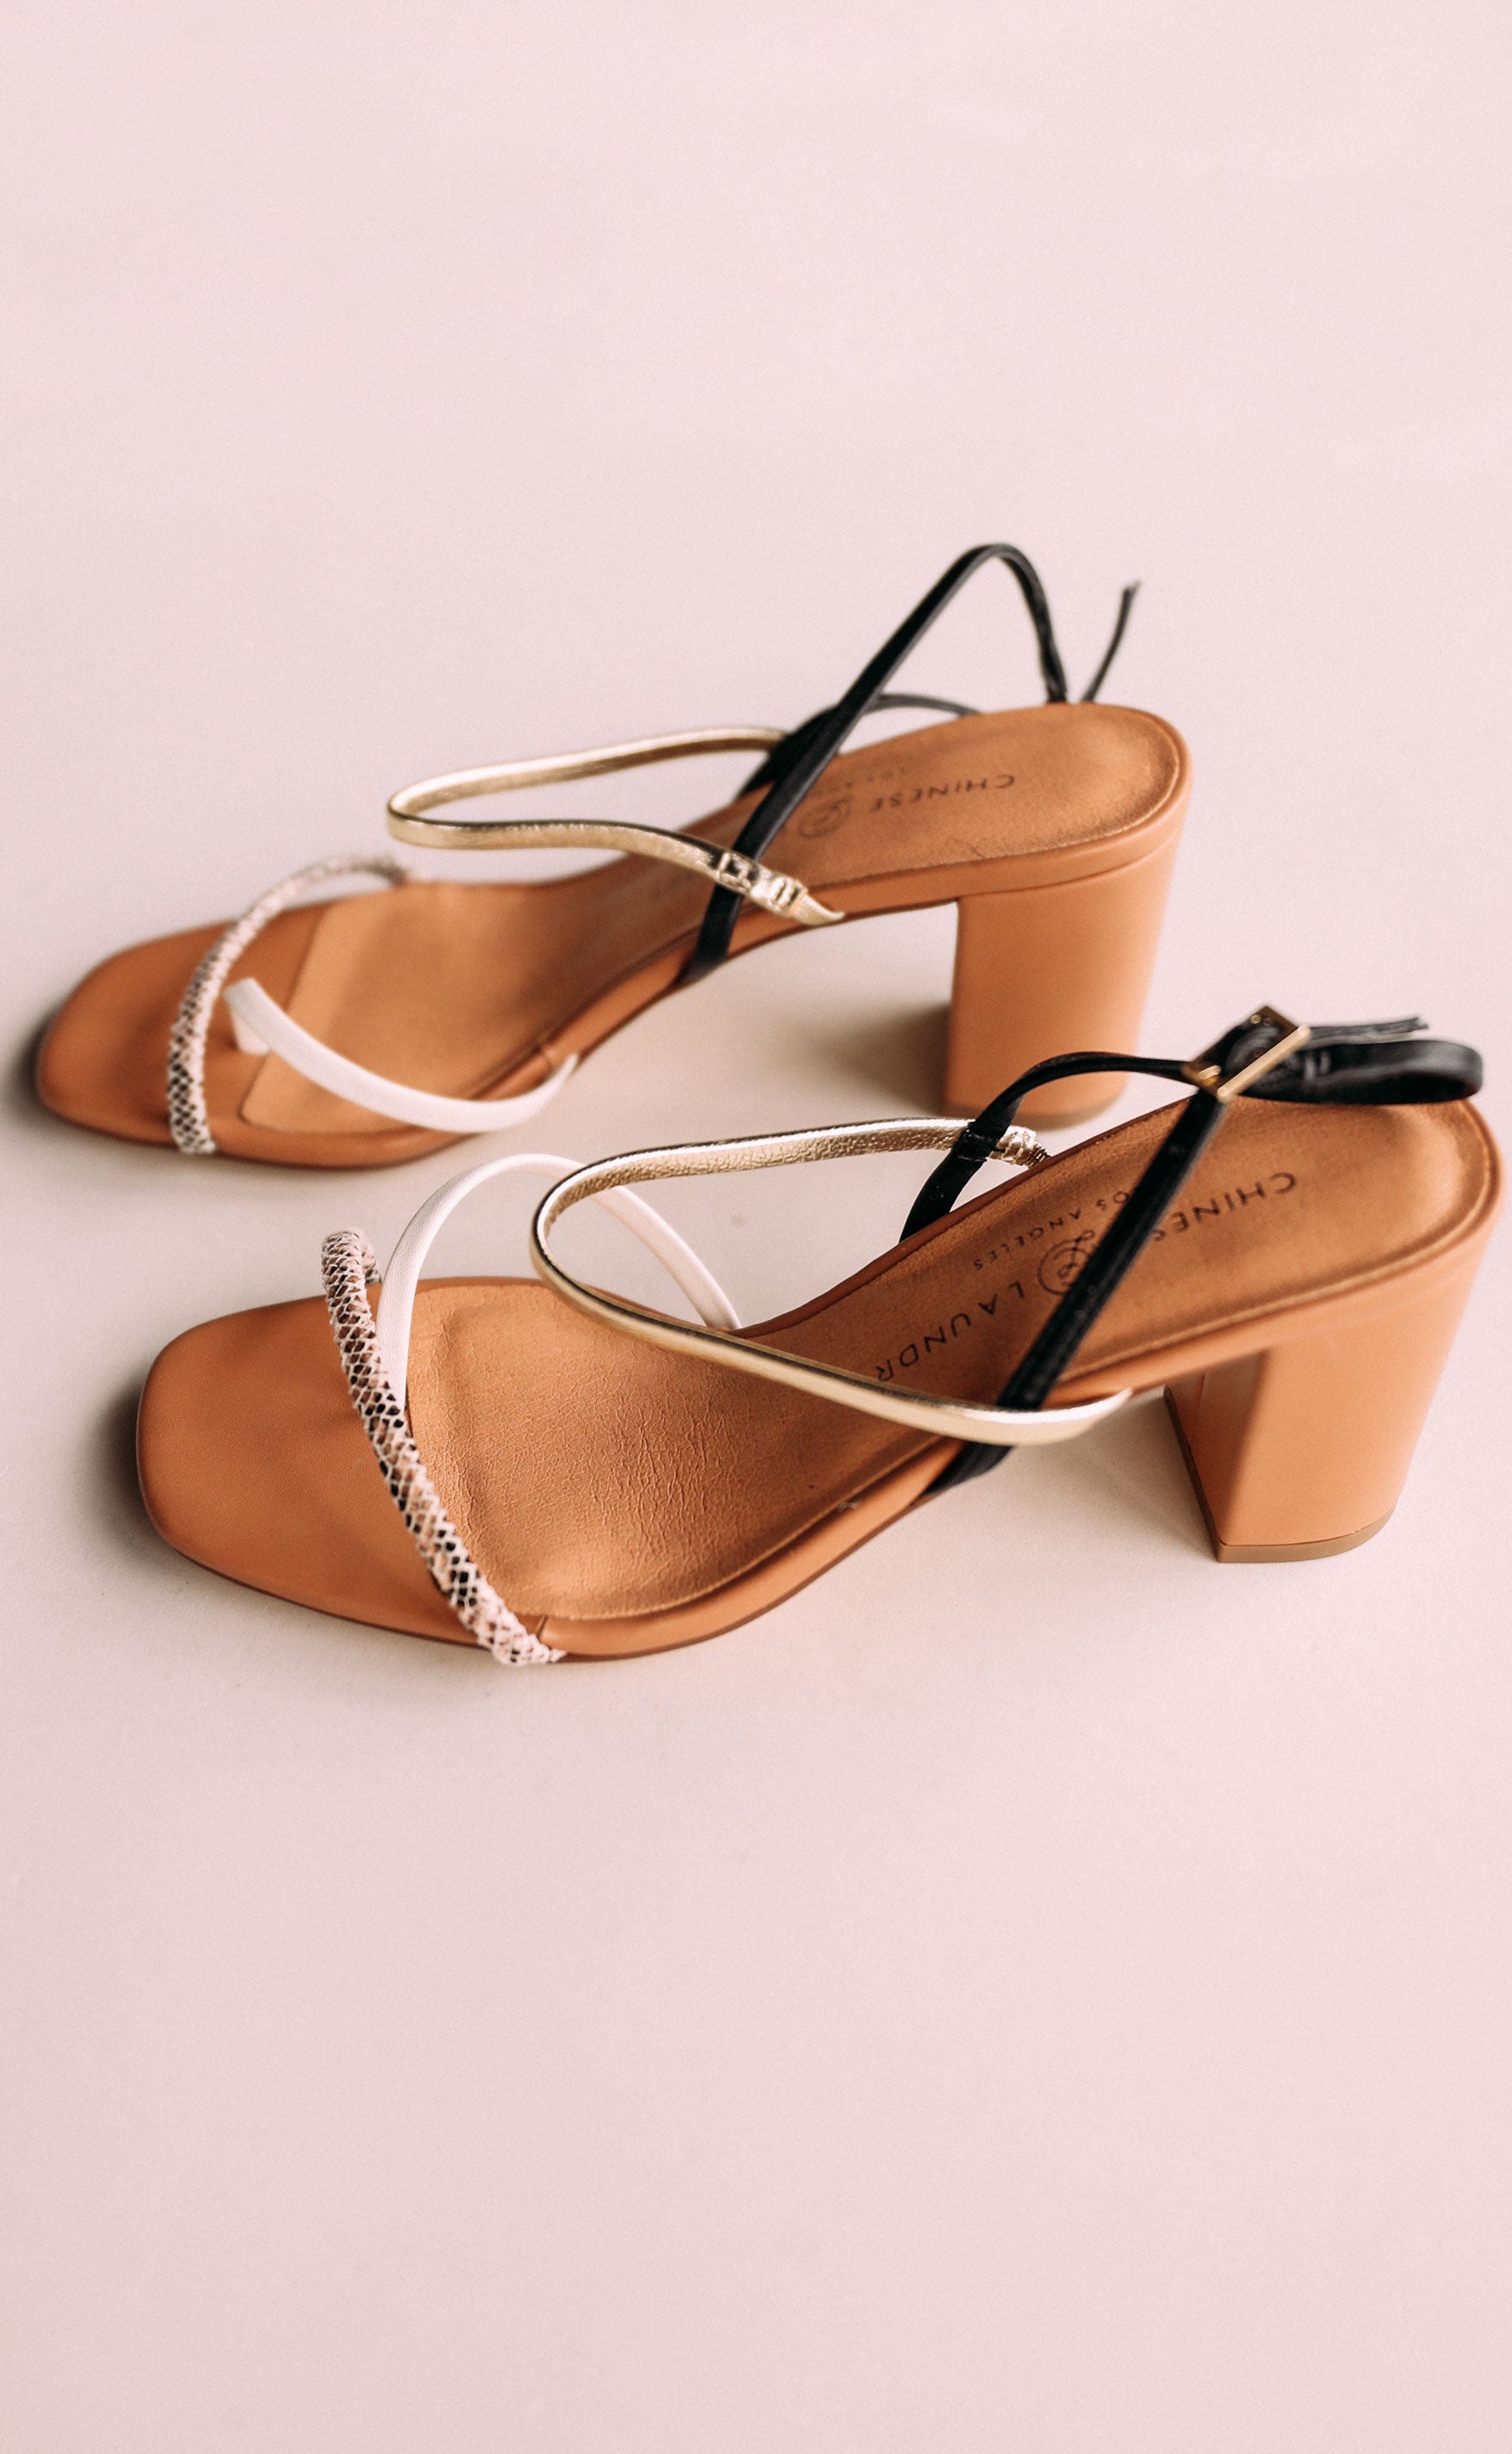 chinese laundry strappy sandals